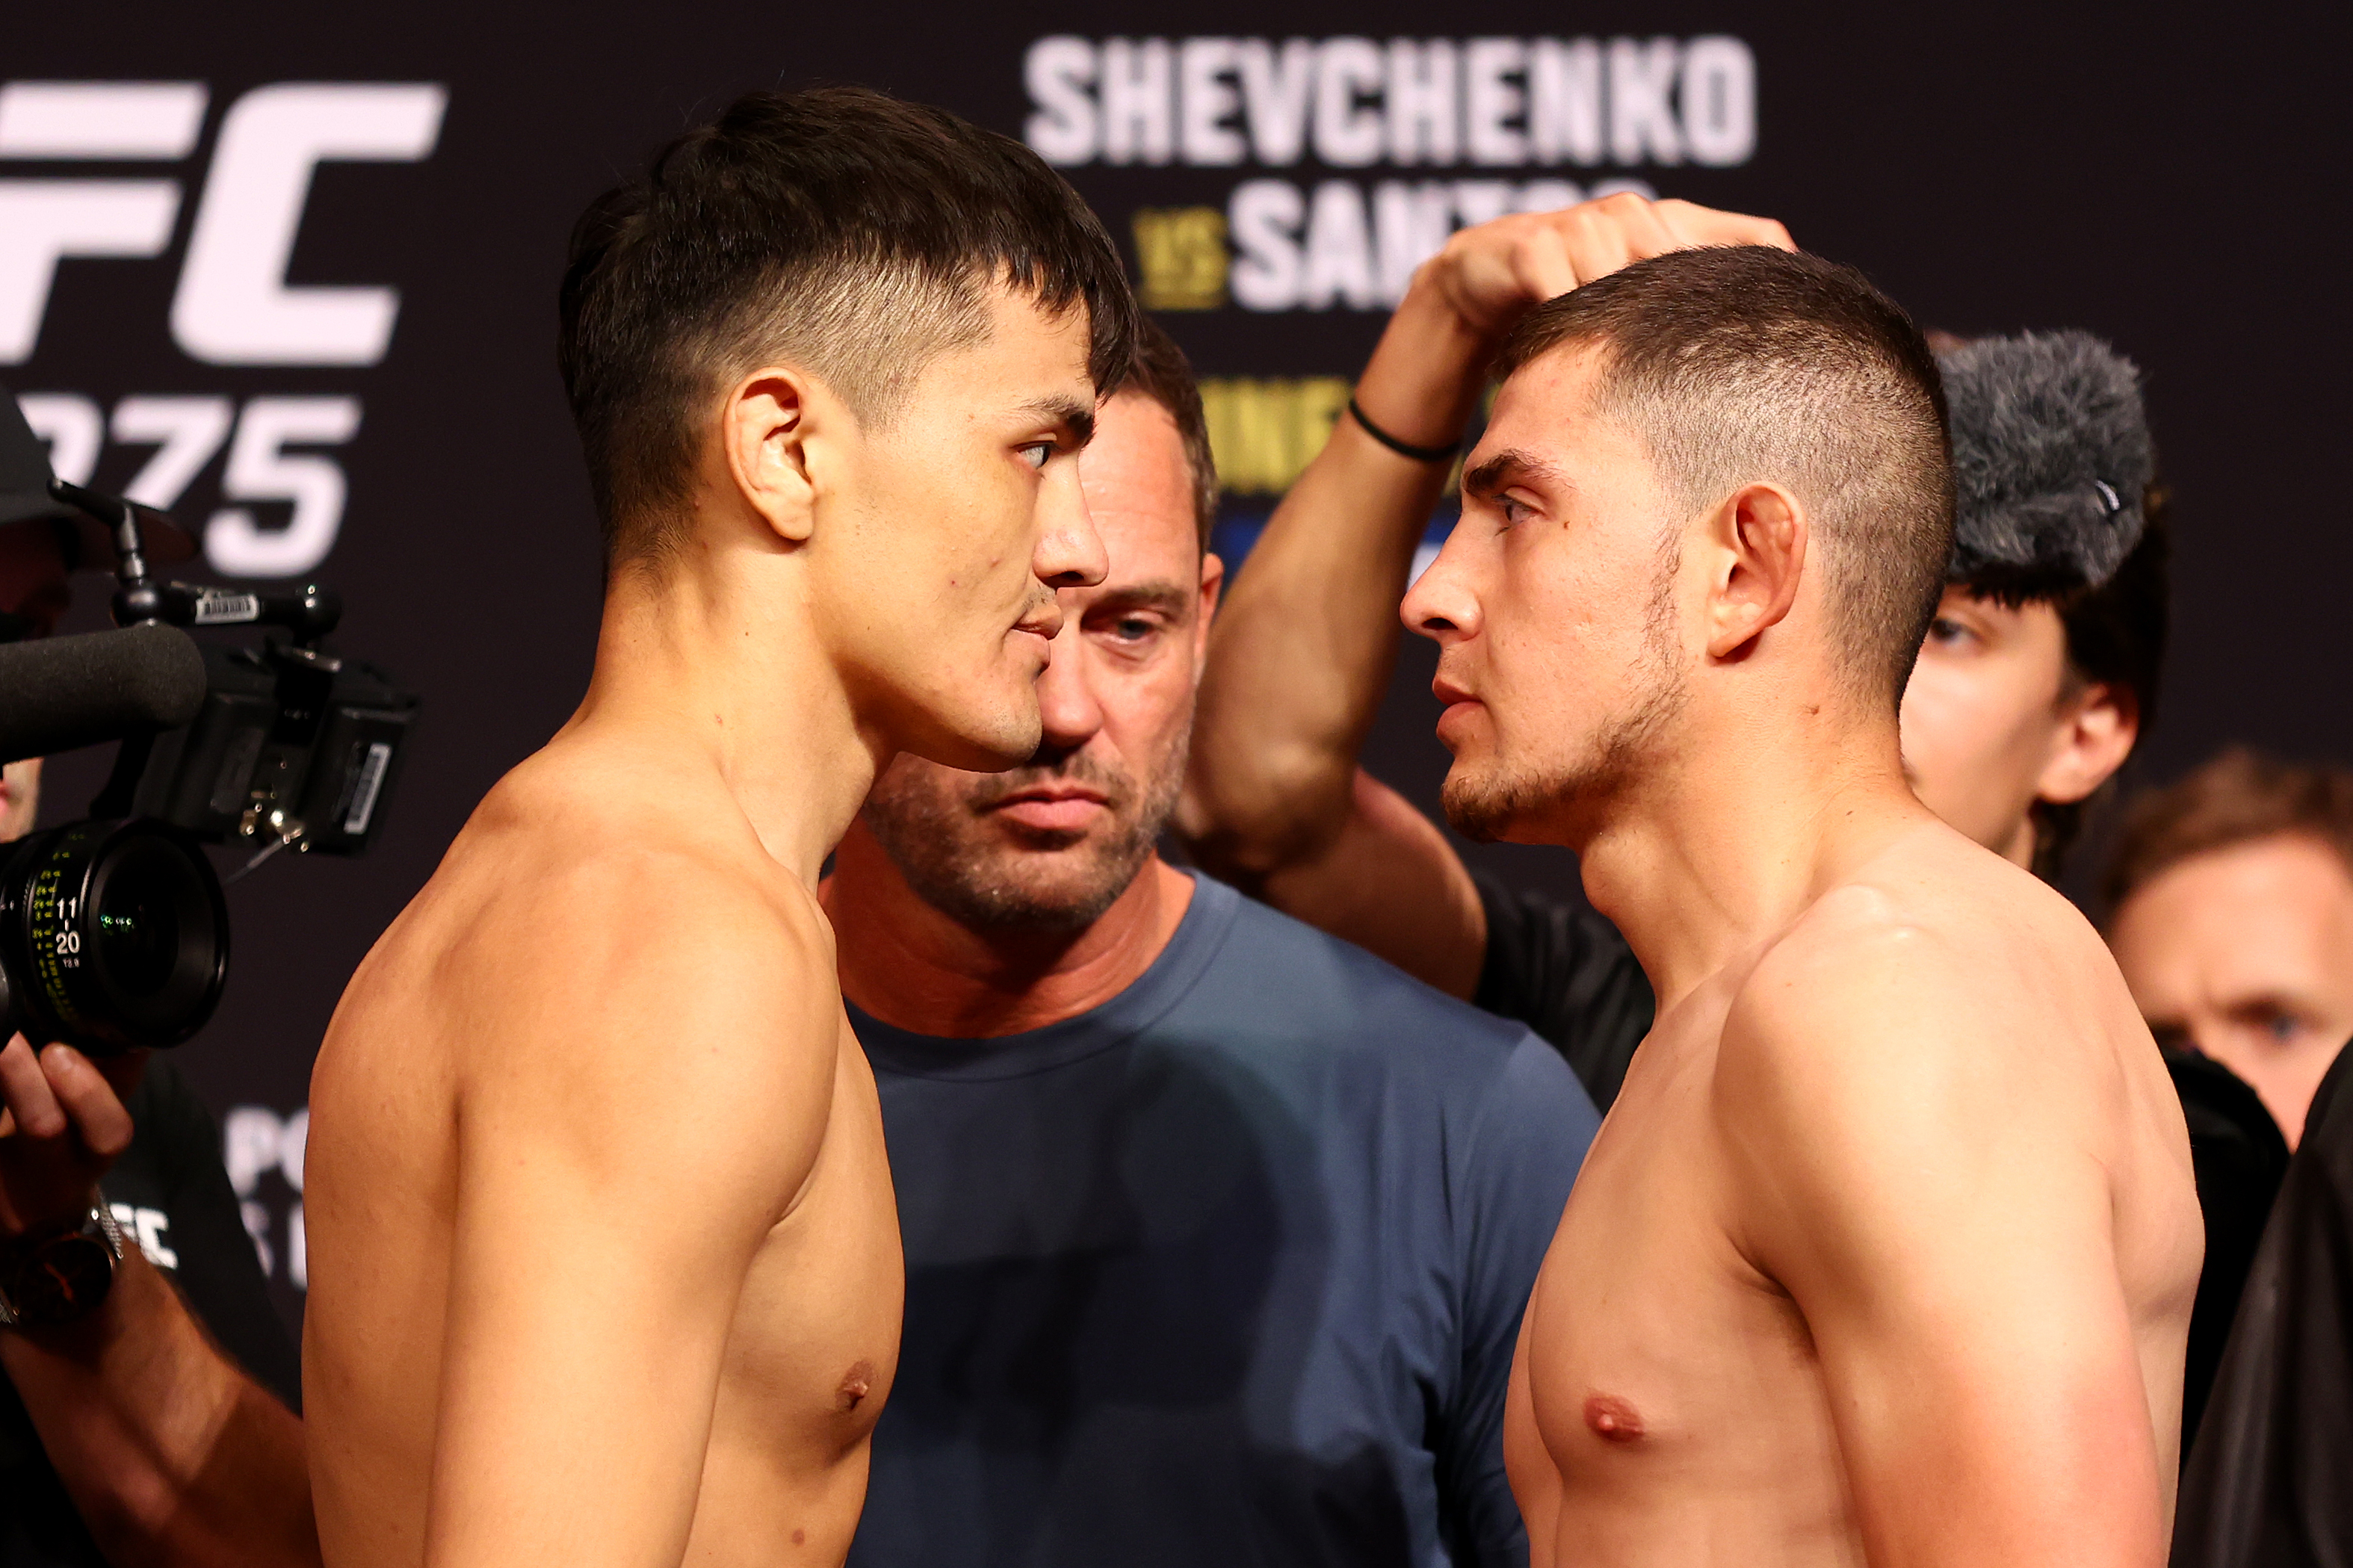 Hayisaer Maheshate of China and Steve Garcia of the United States face off ahead of their lightweight bout during the UFC 275 Weigh-in at Singapore Indoor Stadium on June 10, 2022 in Singapore.